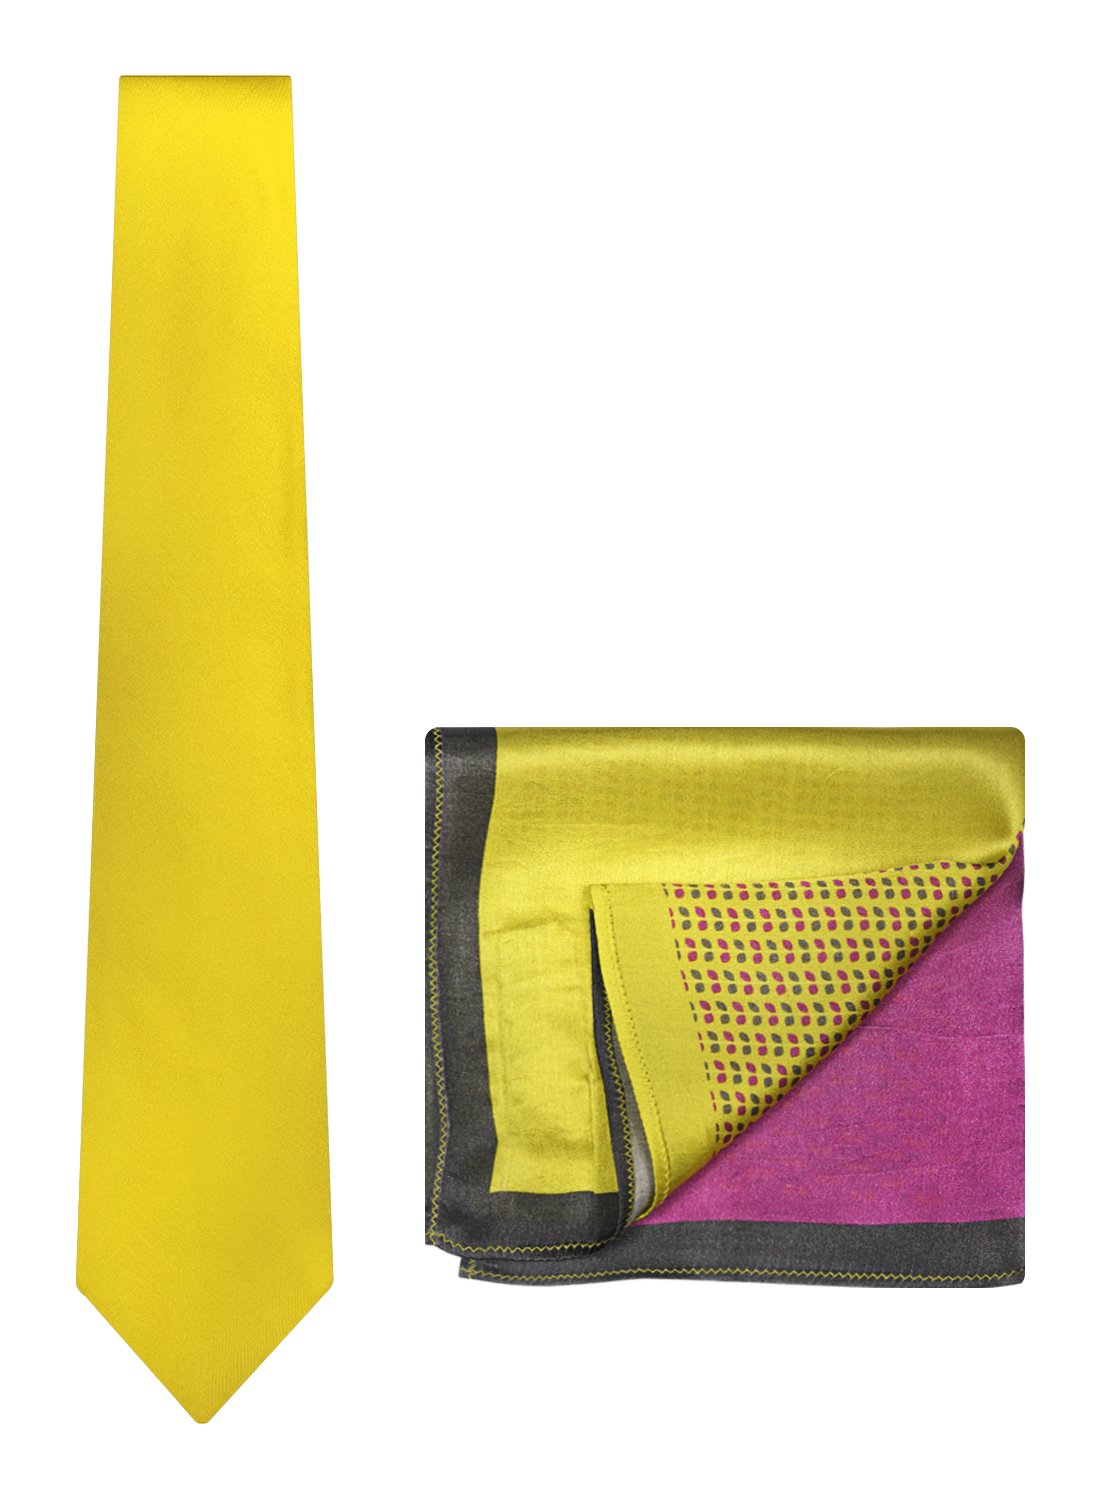 Chokore Yellow color silk tie & Two-in-one Yellow & Purple Green Silk Pocket Square set